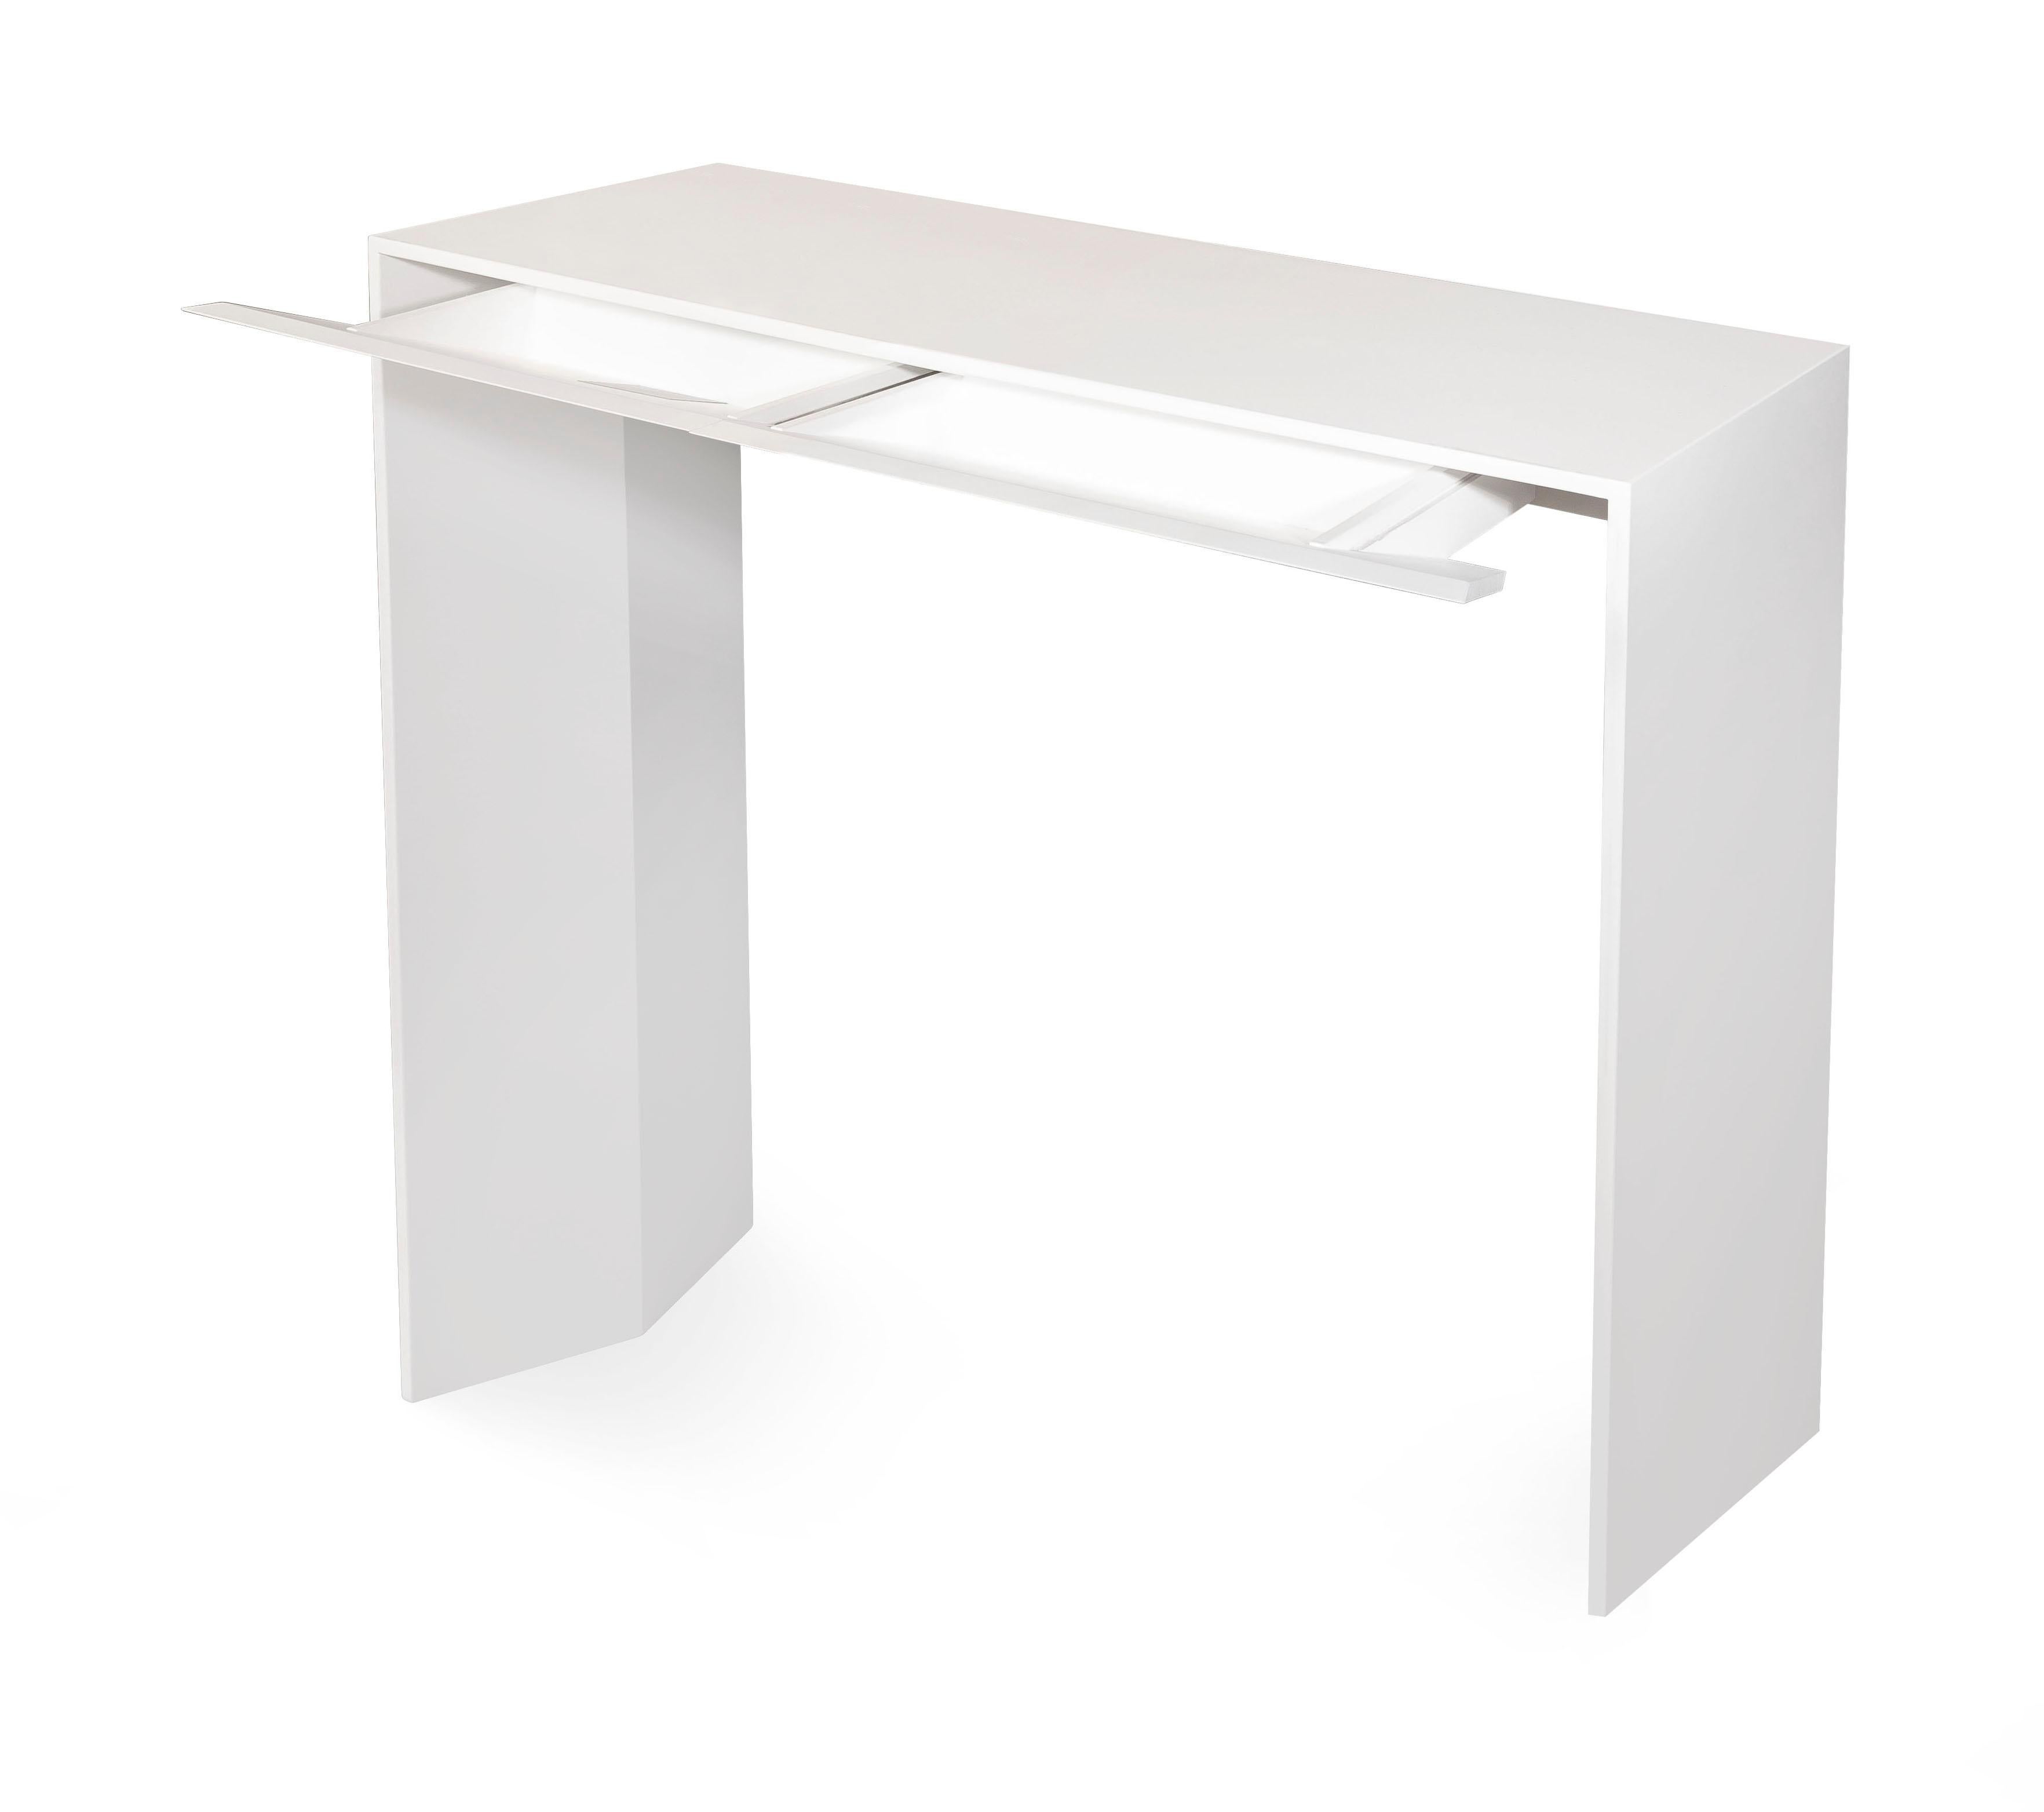 Consolle  with  hips  shaped  inside; 45° graft between plane  and side; 2 (90 version) or 
3 drawers (120/150) retractable  undercounter, lacquered MDF finish  white and black lacquer.